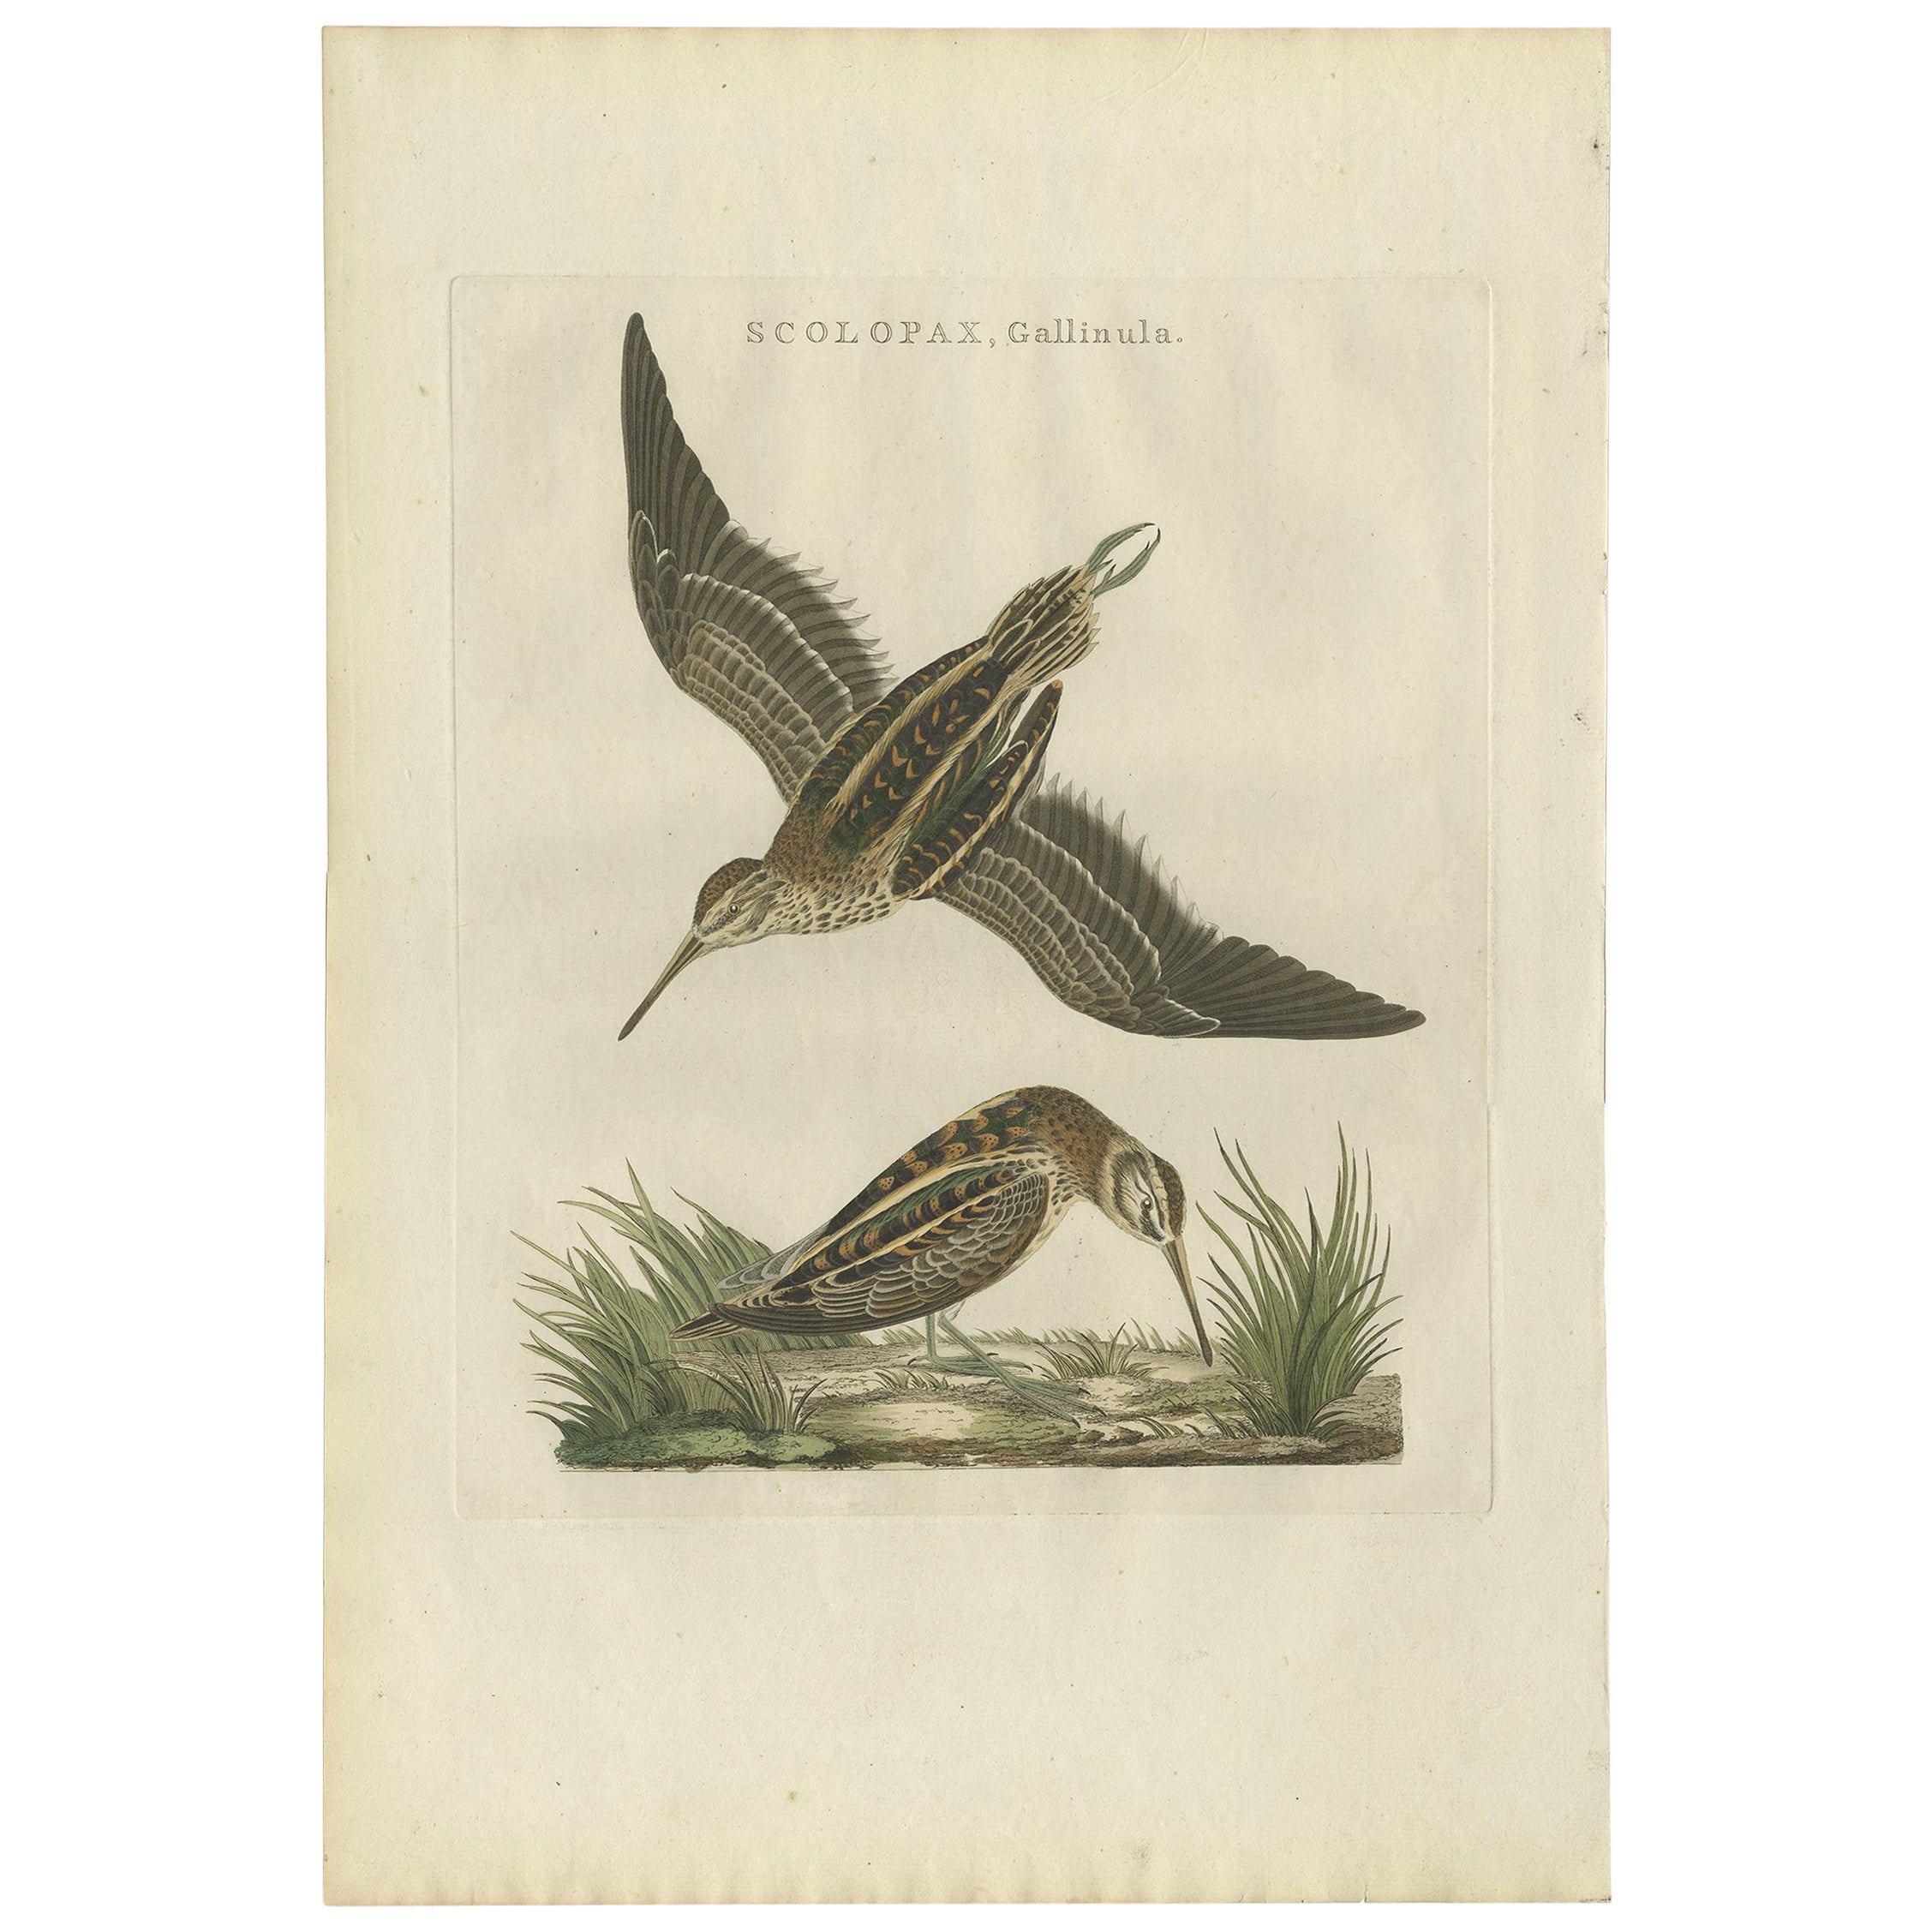 Antique Hand-Colored Bird Print of the Wader Jack Snipe, 1797